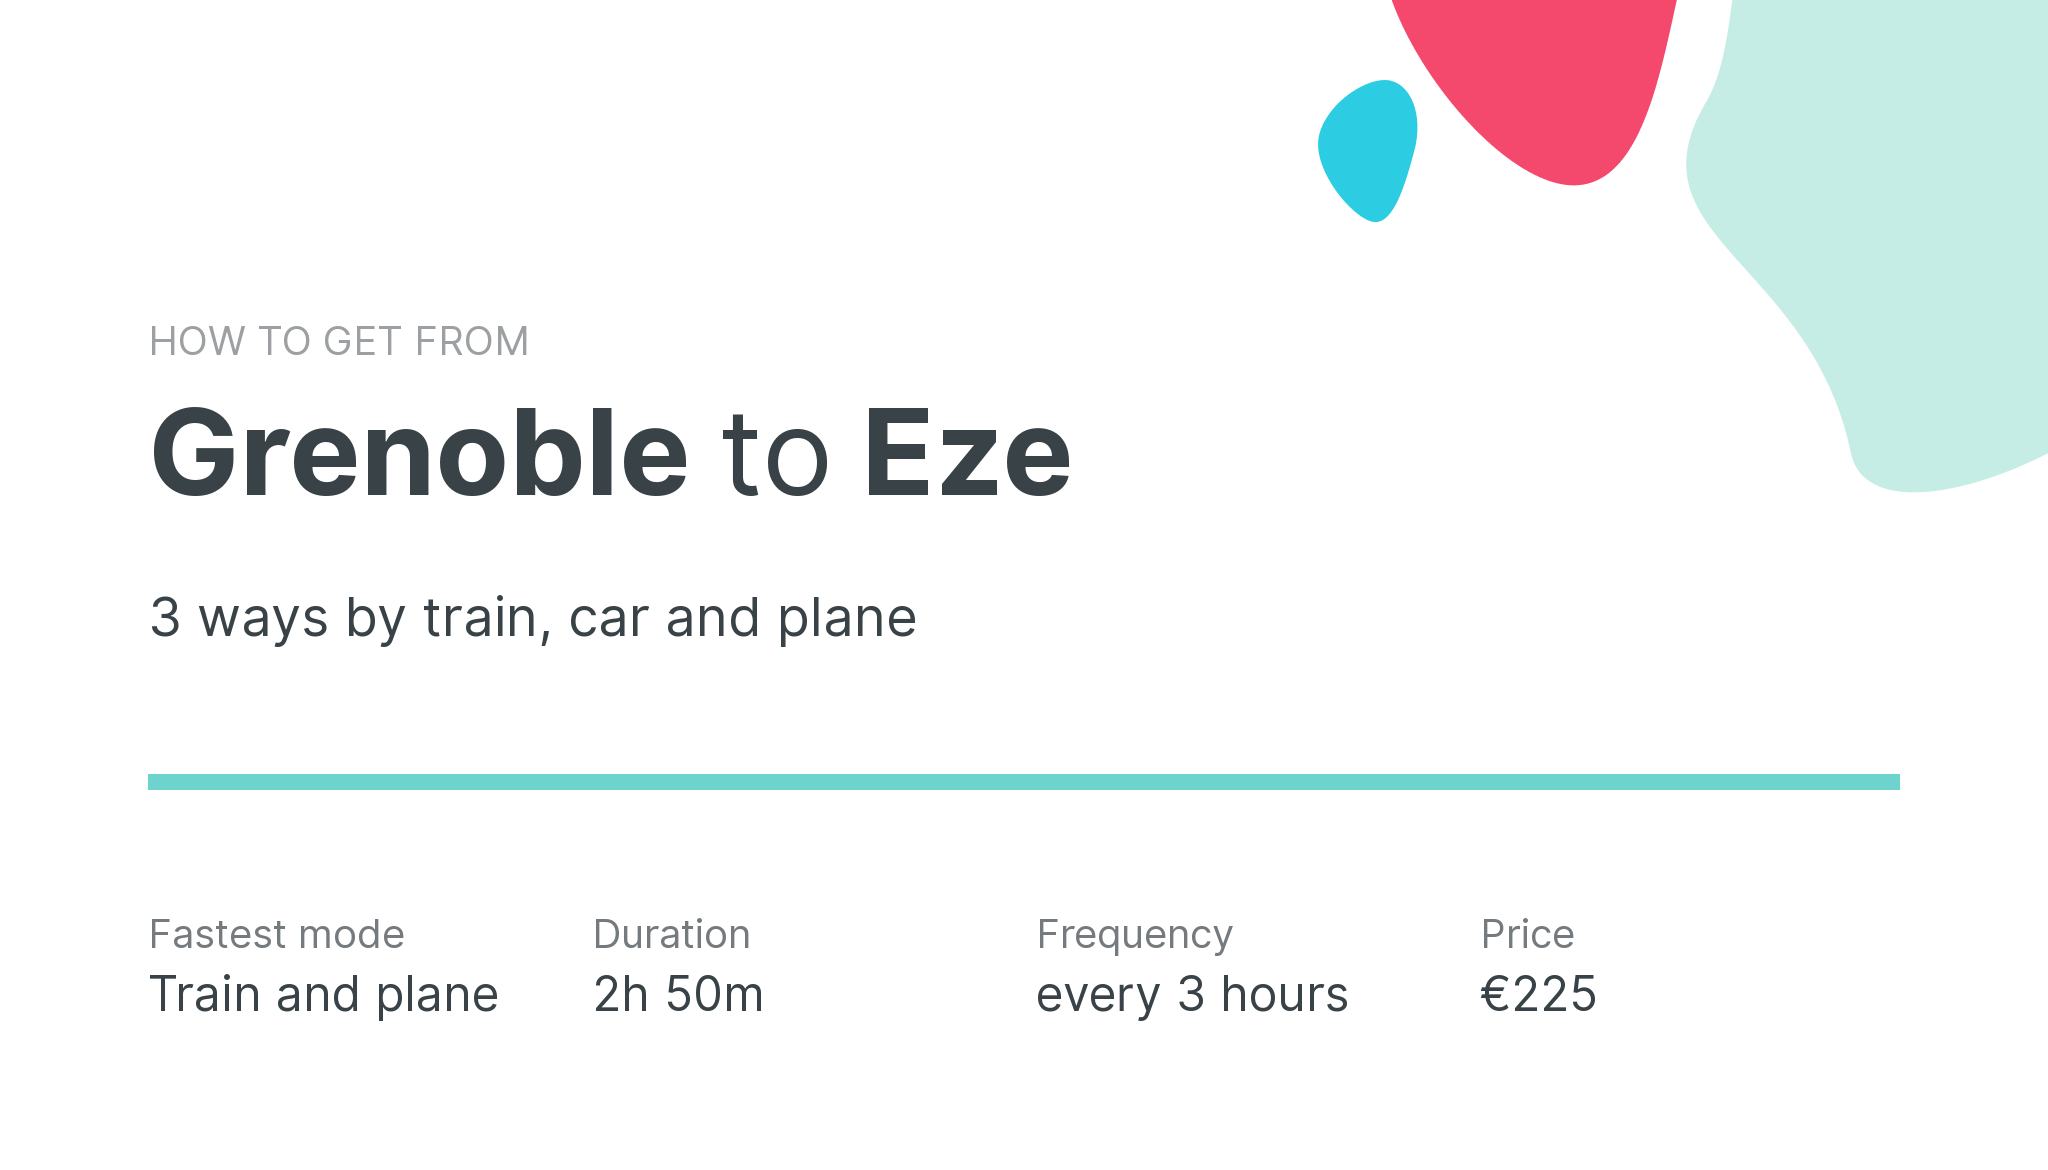 How do I get from Grenoble to Eze